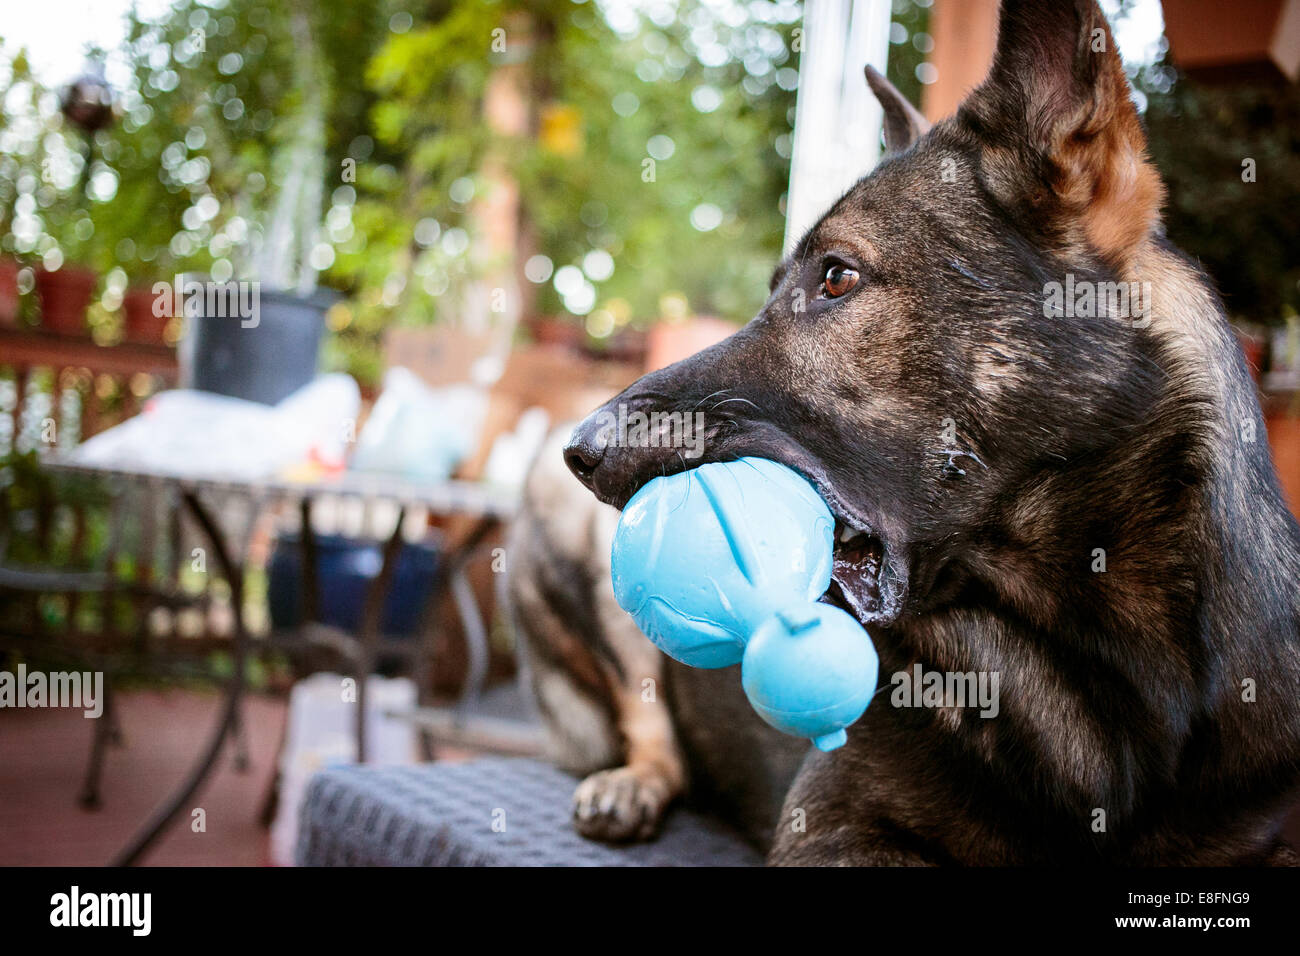 German Shepherd Dog with rubber toy in mouth Stock Photo